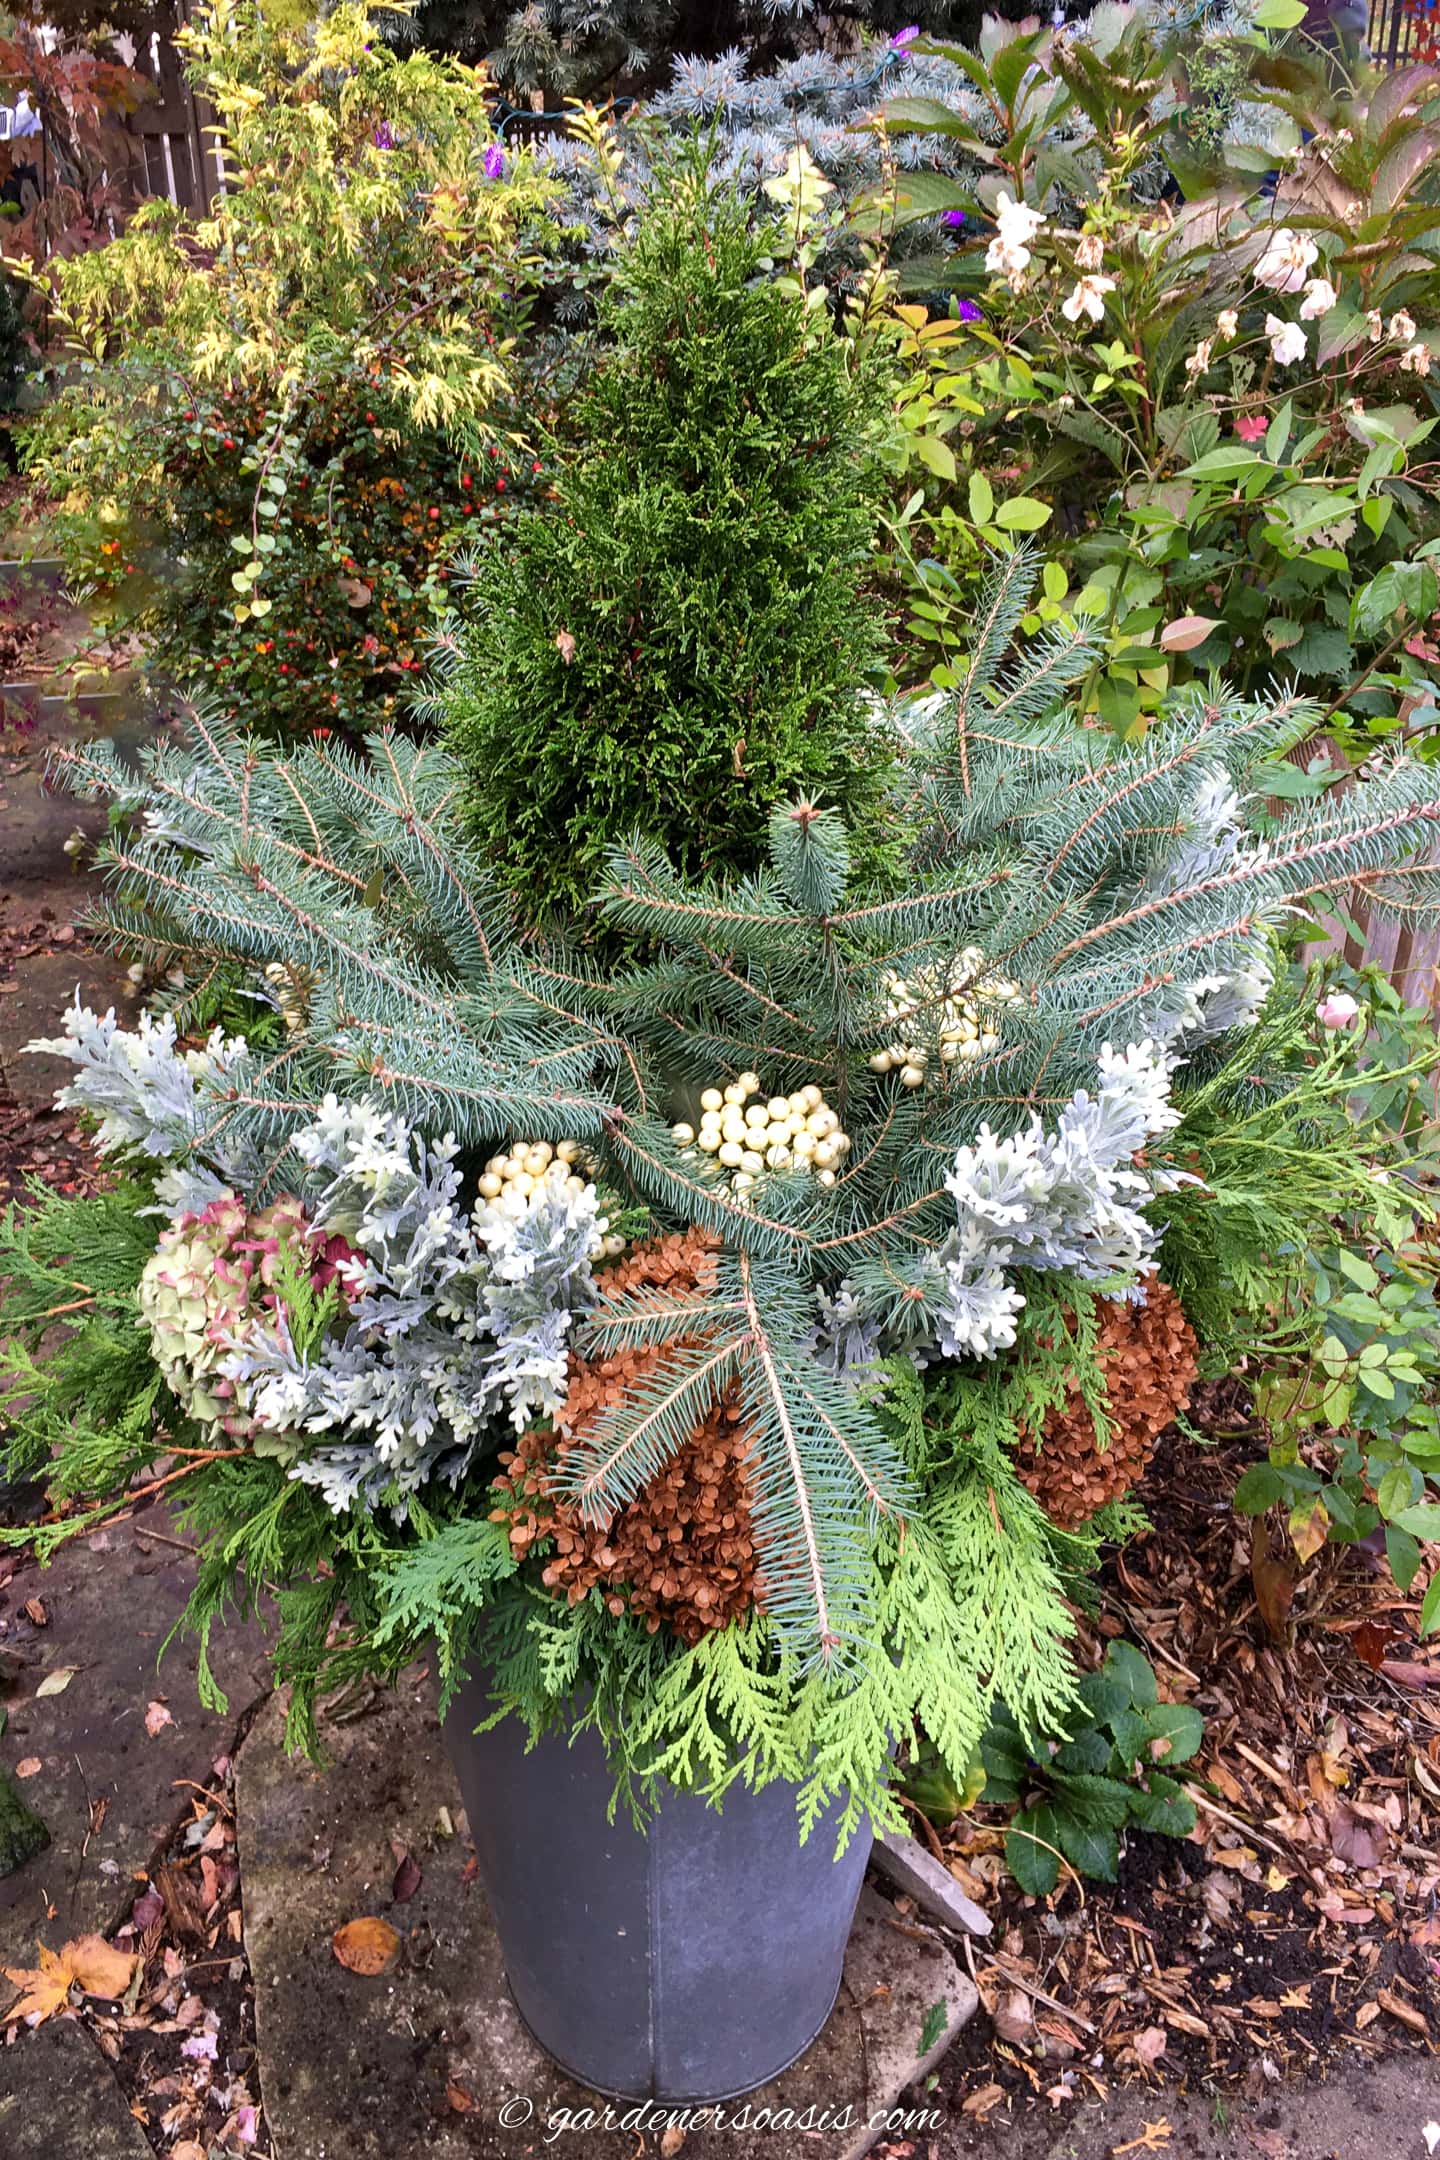 An outdoor winter planter with evergreens, dusty miller picks, white berry picks and dried Hydrangea flowers